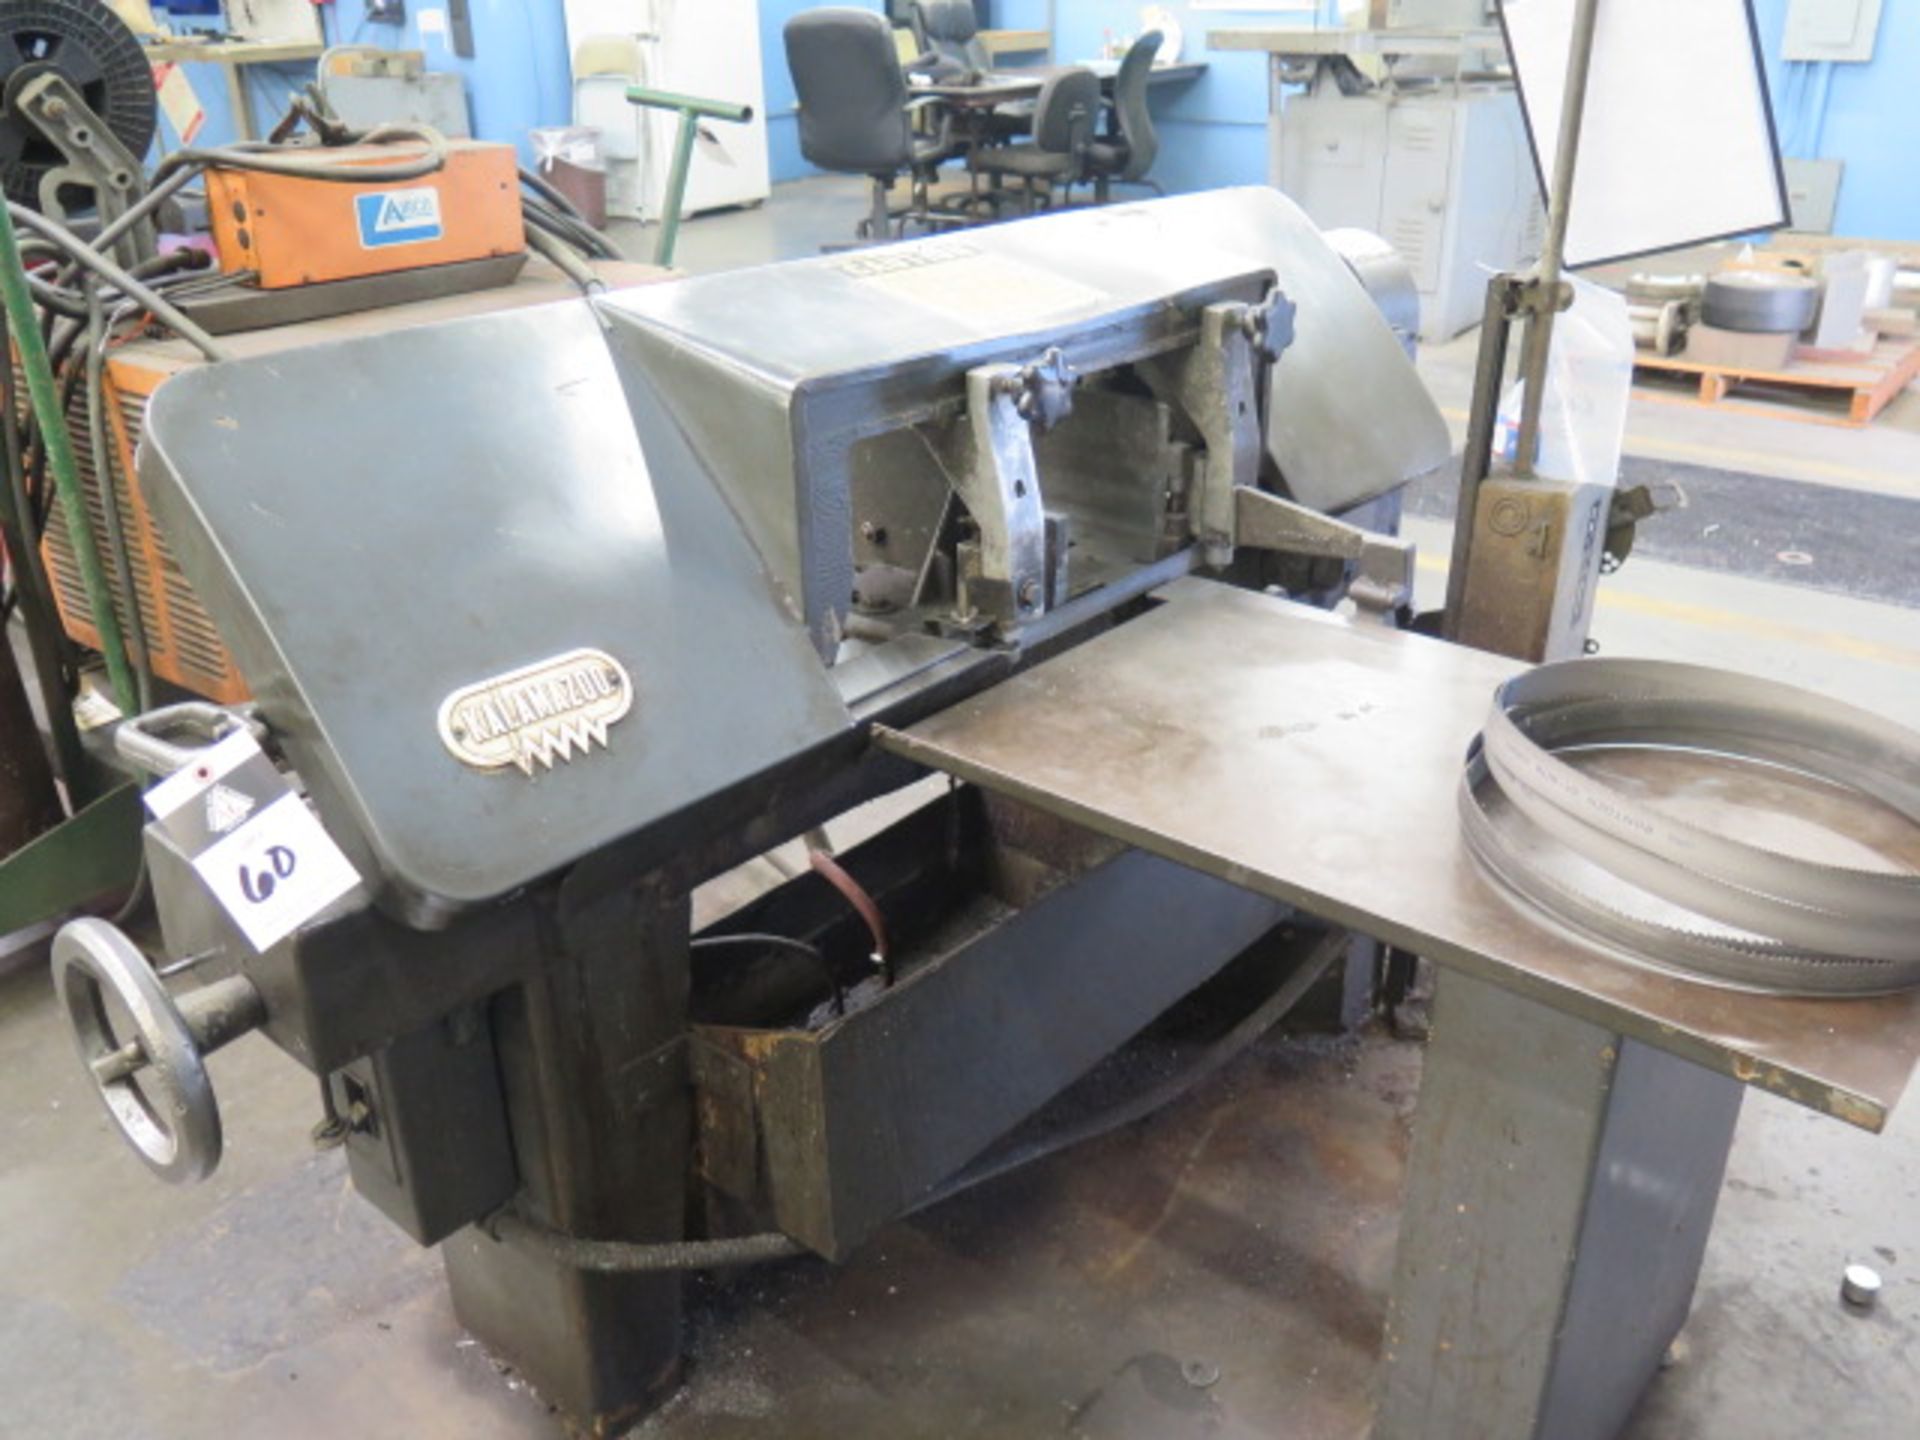 Kalamazoo H9AWV 9" Horizontal Band Saw s/n 15966 w/ Manual Clamping, Work Stop, Coolant, SOLD AS IS - Image 2 of 5